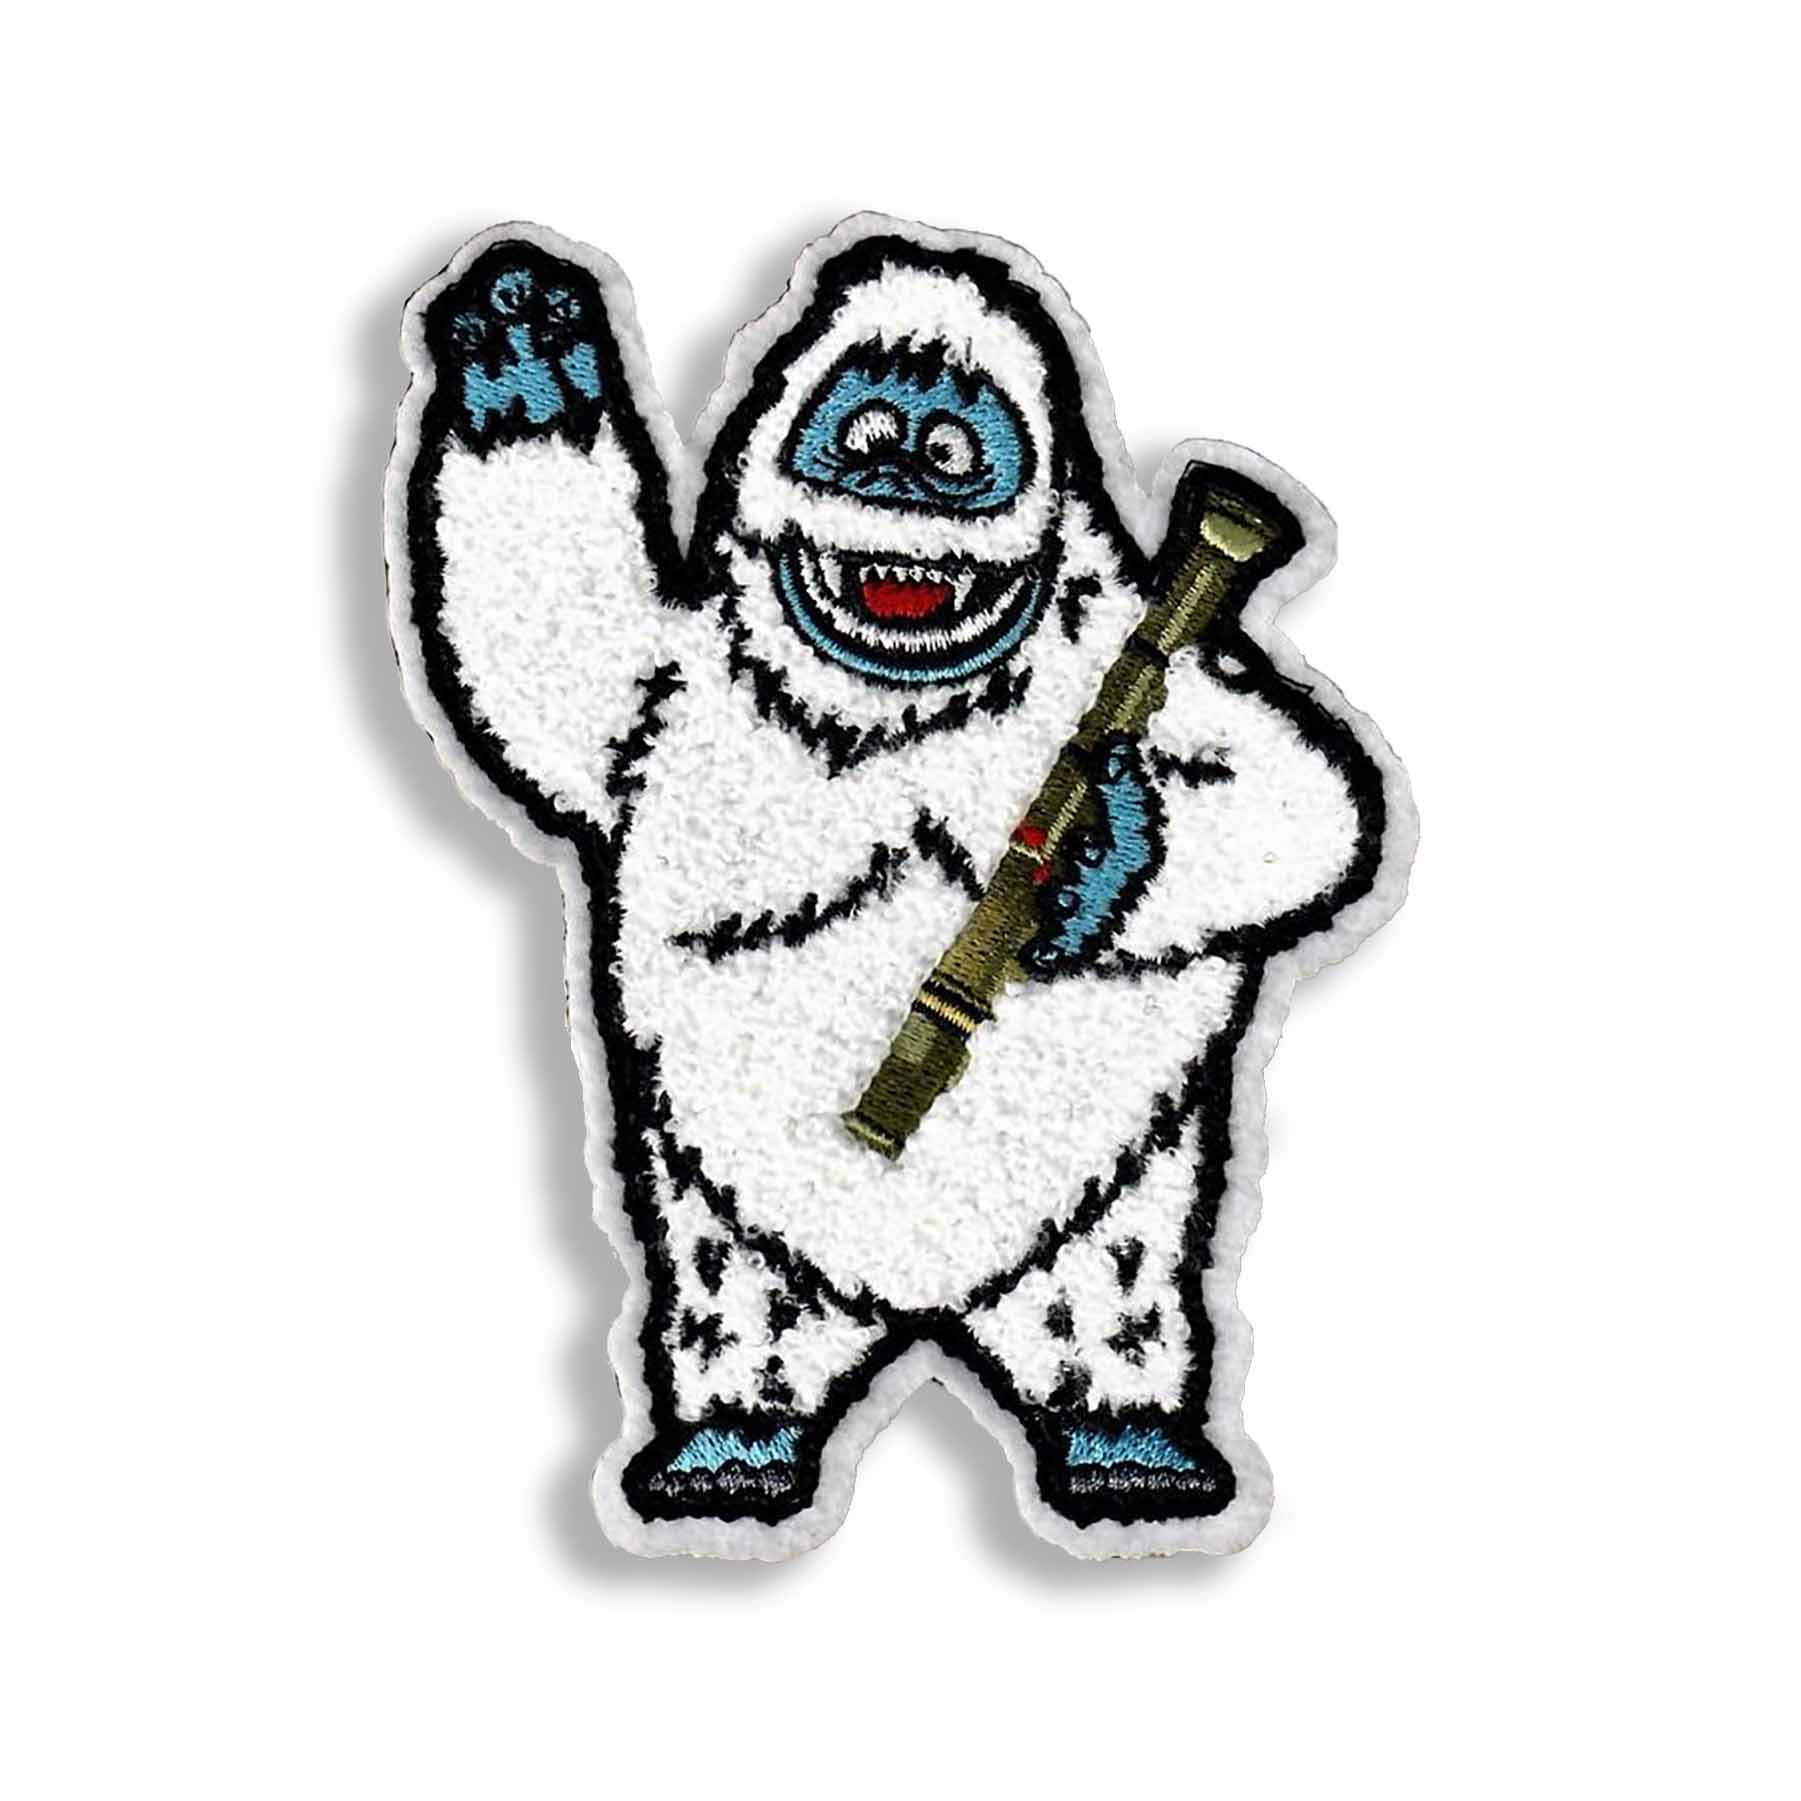 abominable snowman rudolph drawing